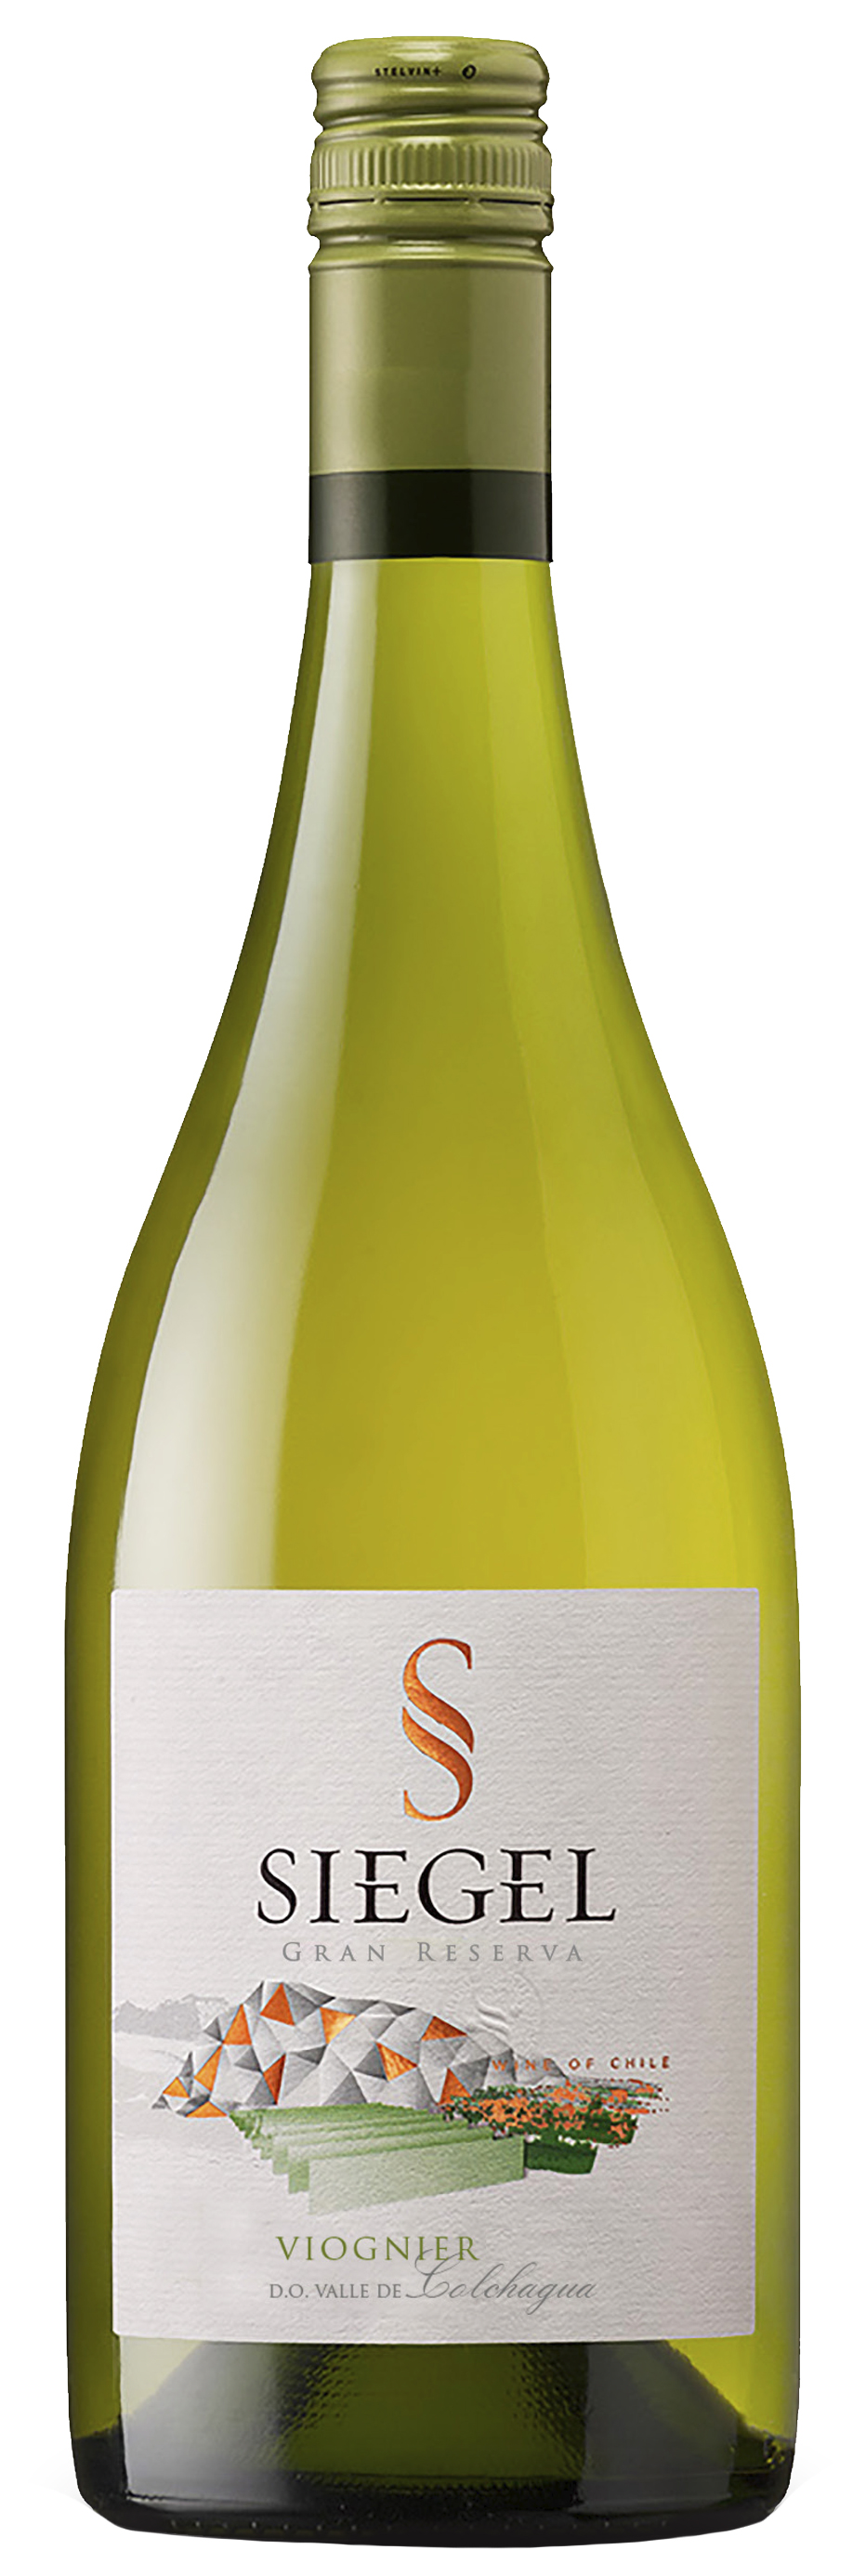 Siegel Gran Reserva Viognier 2022 | Timeless Wines - Order Wine Online from  the United States - California Wines - French Wines - Spanish Wines -  Chardonnay - Port - Cabernet Savignon